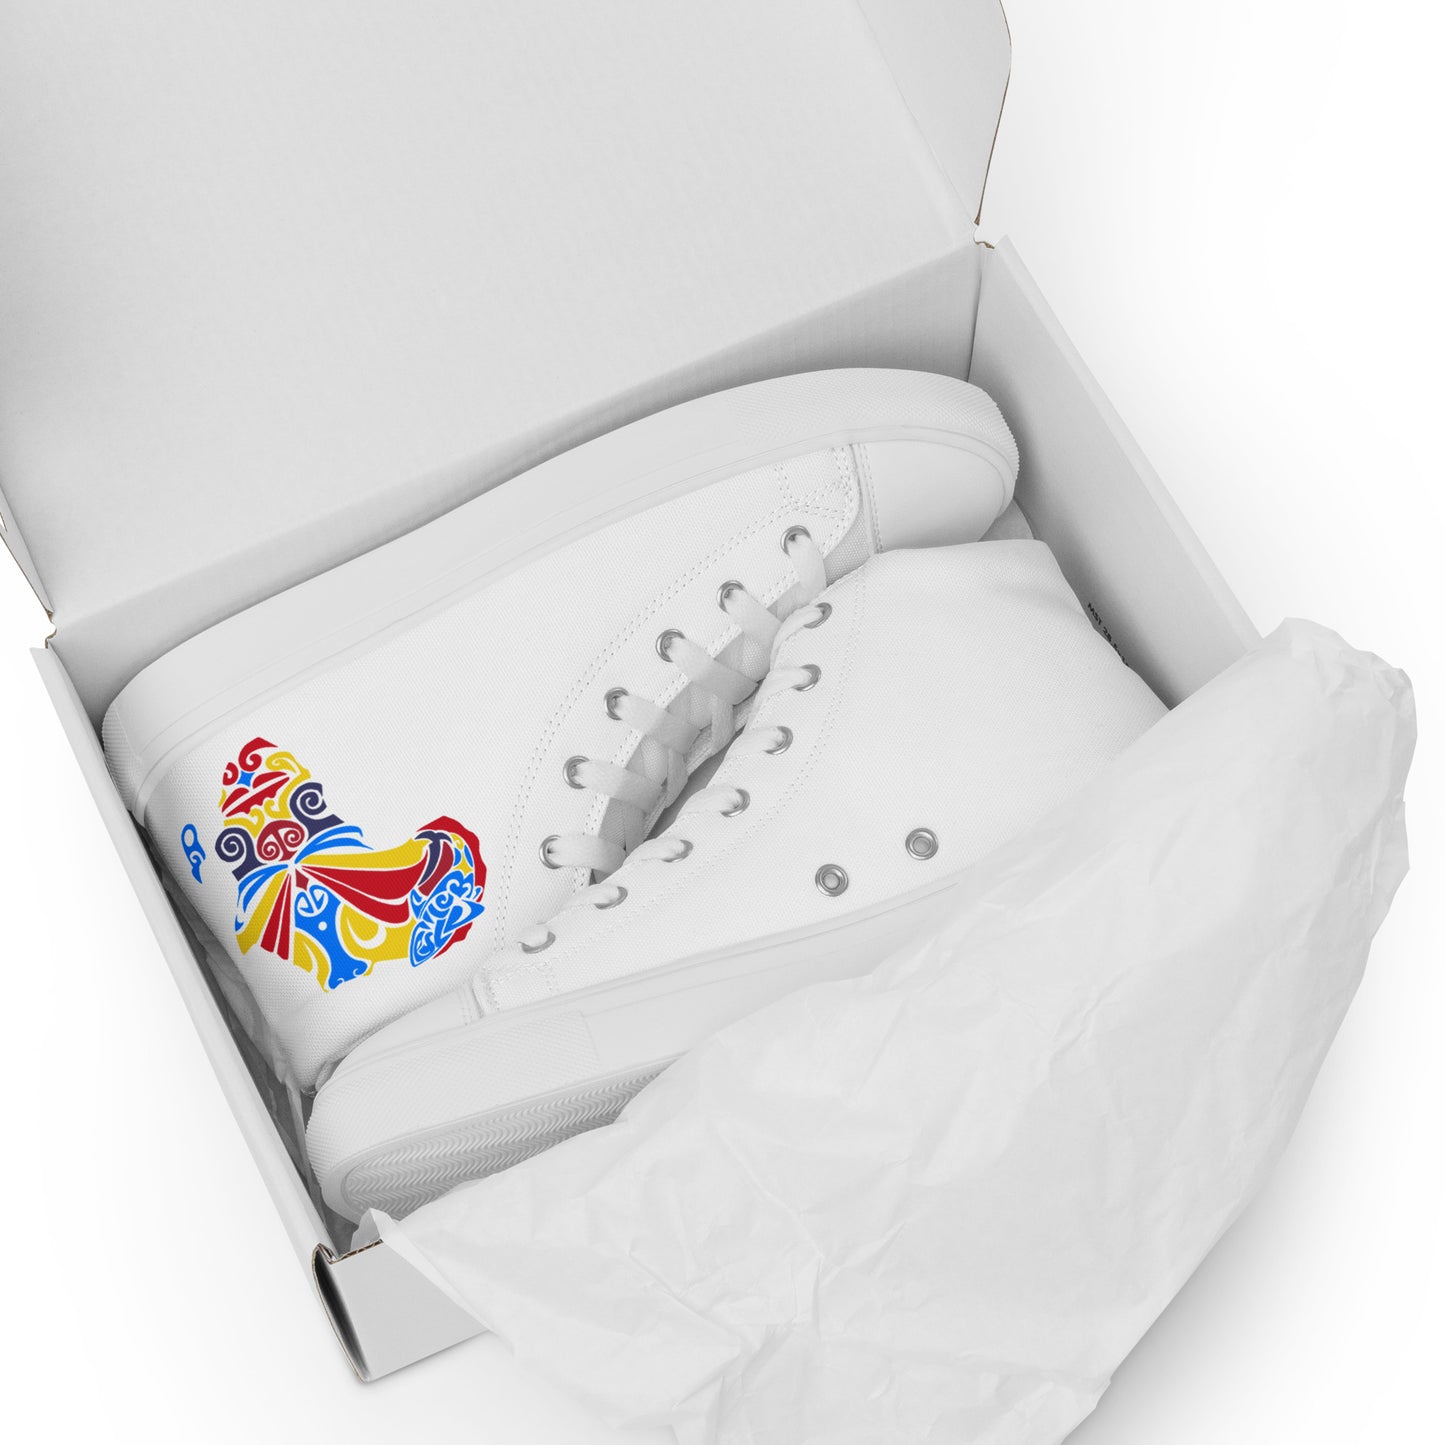 Women’s High Top Canvas Shoes - Banamerica Collection